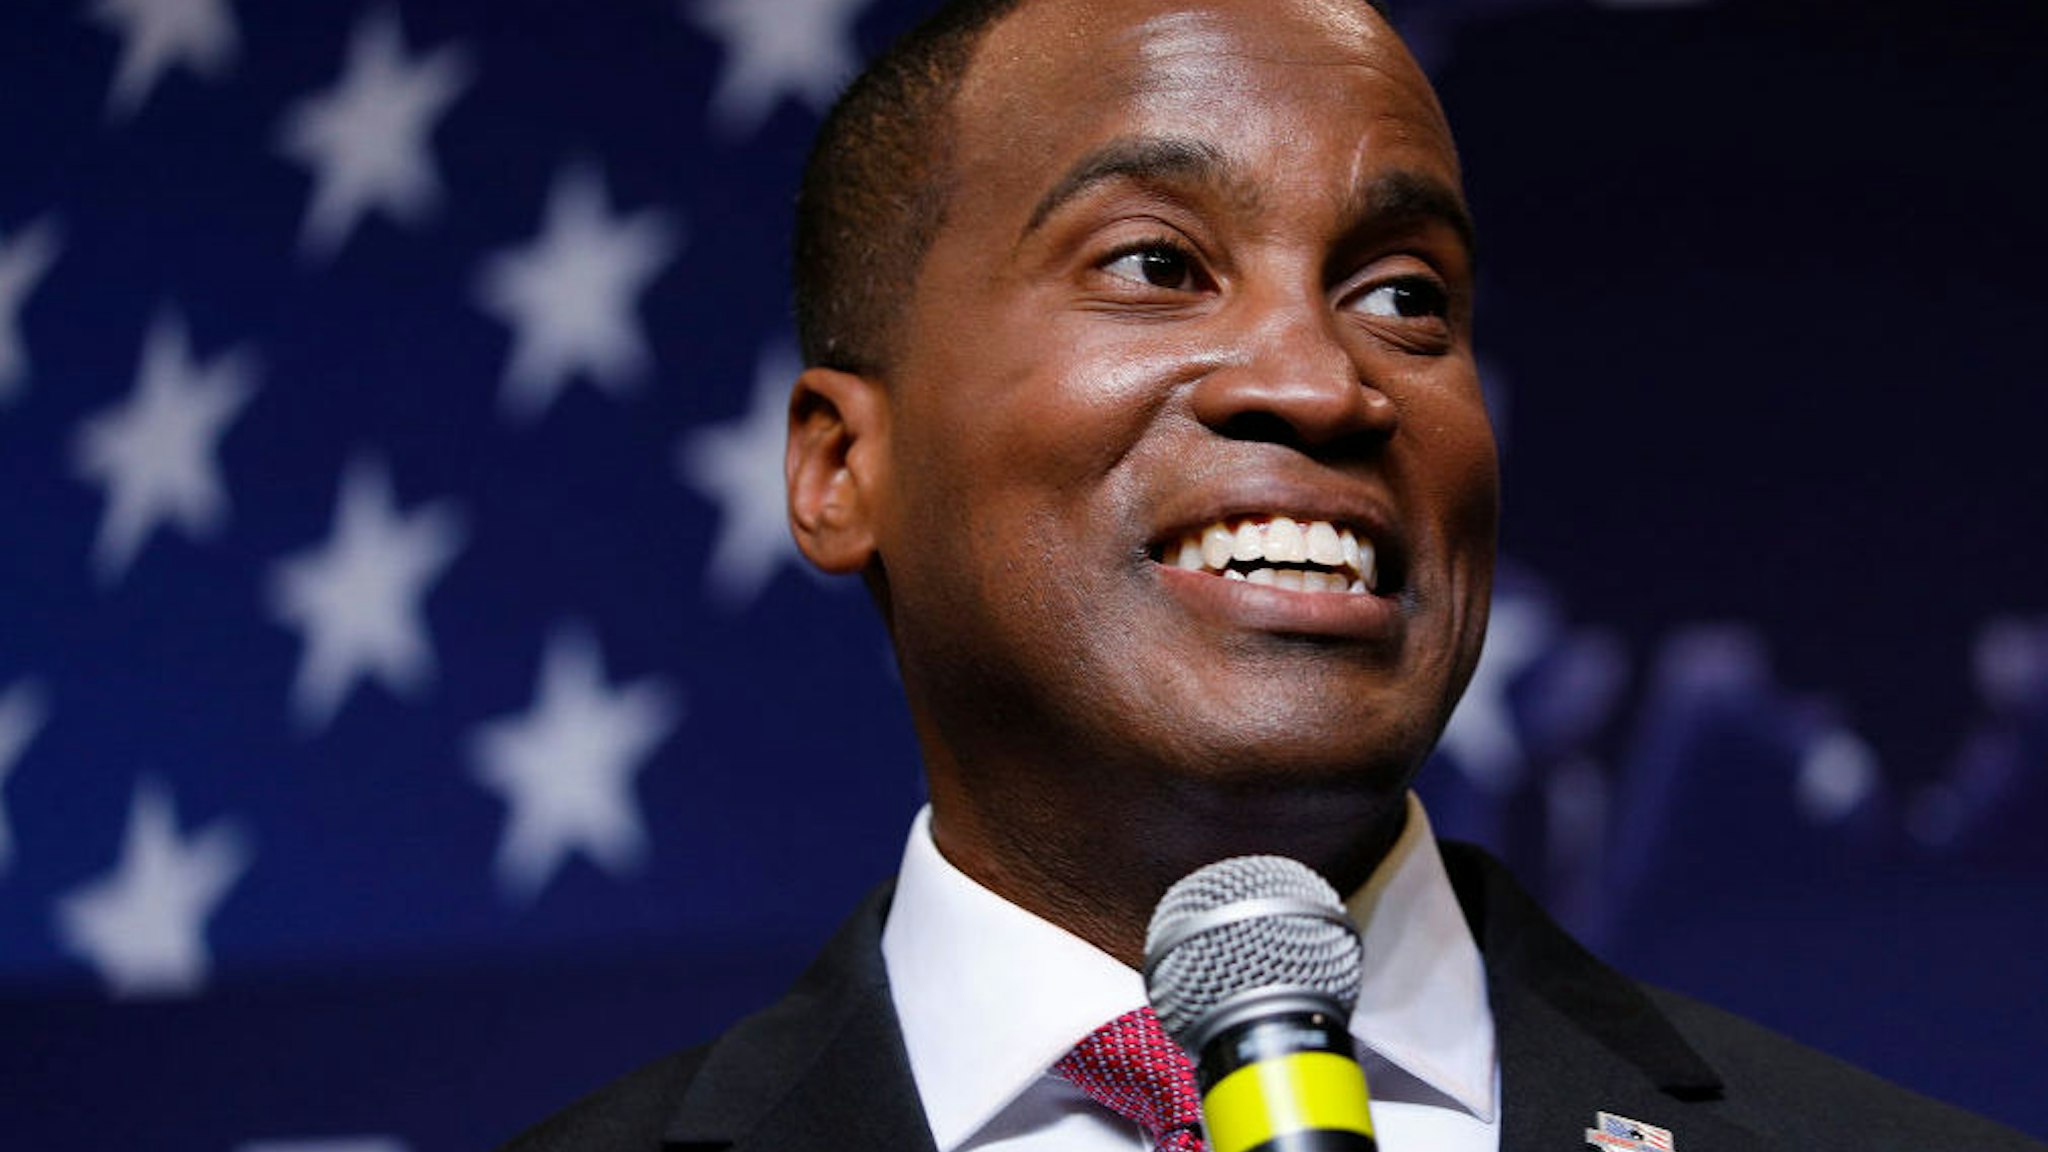 John James, Michigan GOP Senate candidate, speaks at an election night event after winning his primary election at his business, James Group International August 7, 2018 in Detroit, Michigan.